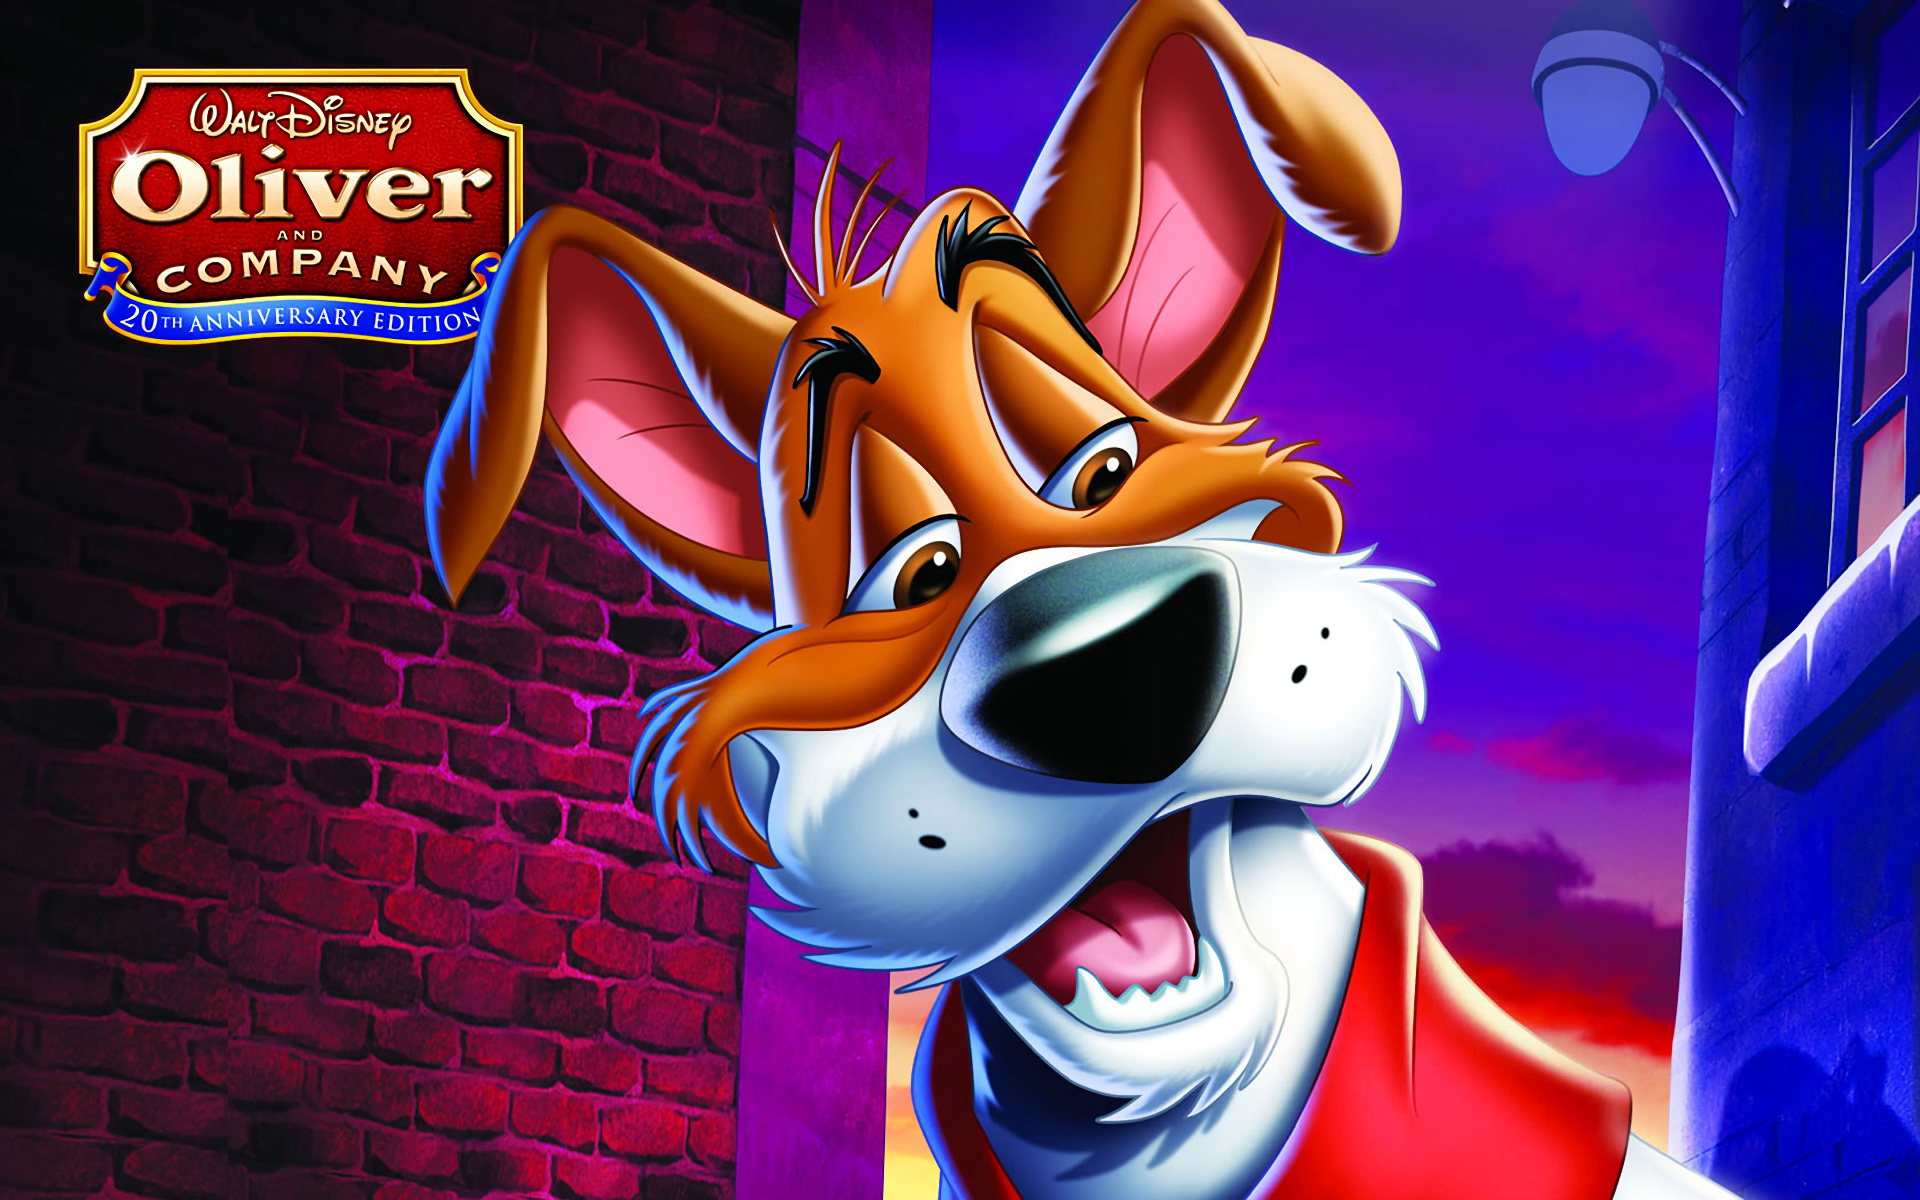 Oliver and Company, HD backgrounds, Vibrant animation, Heartwarming story, 1920x1200 HD Desktop